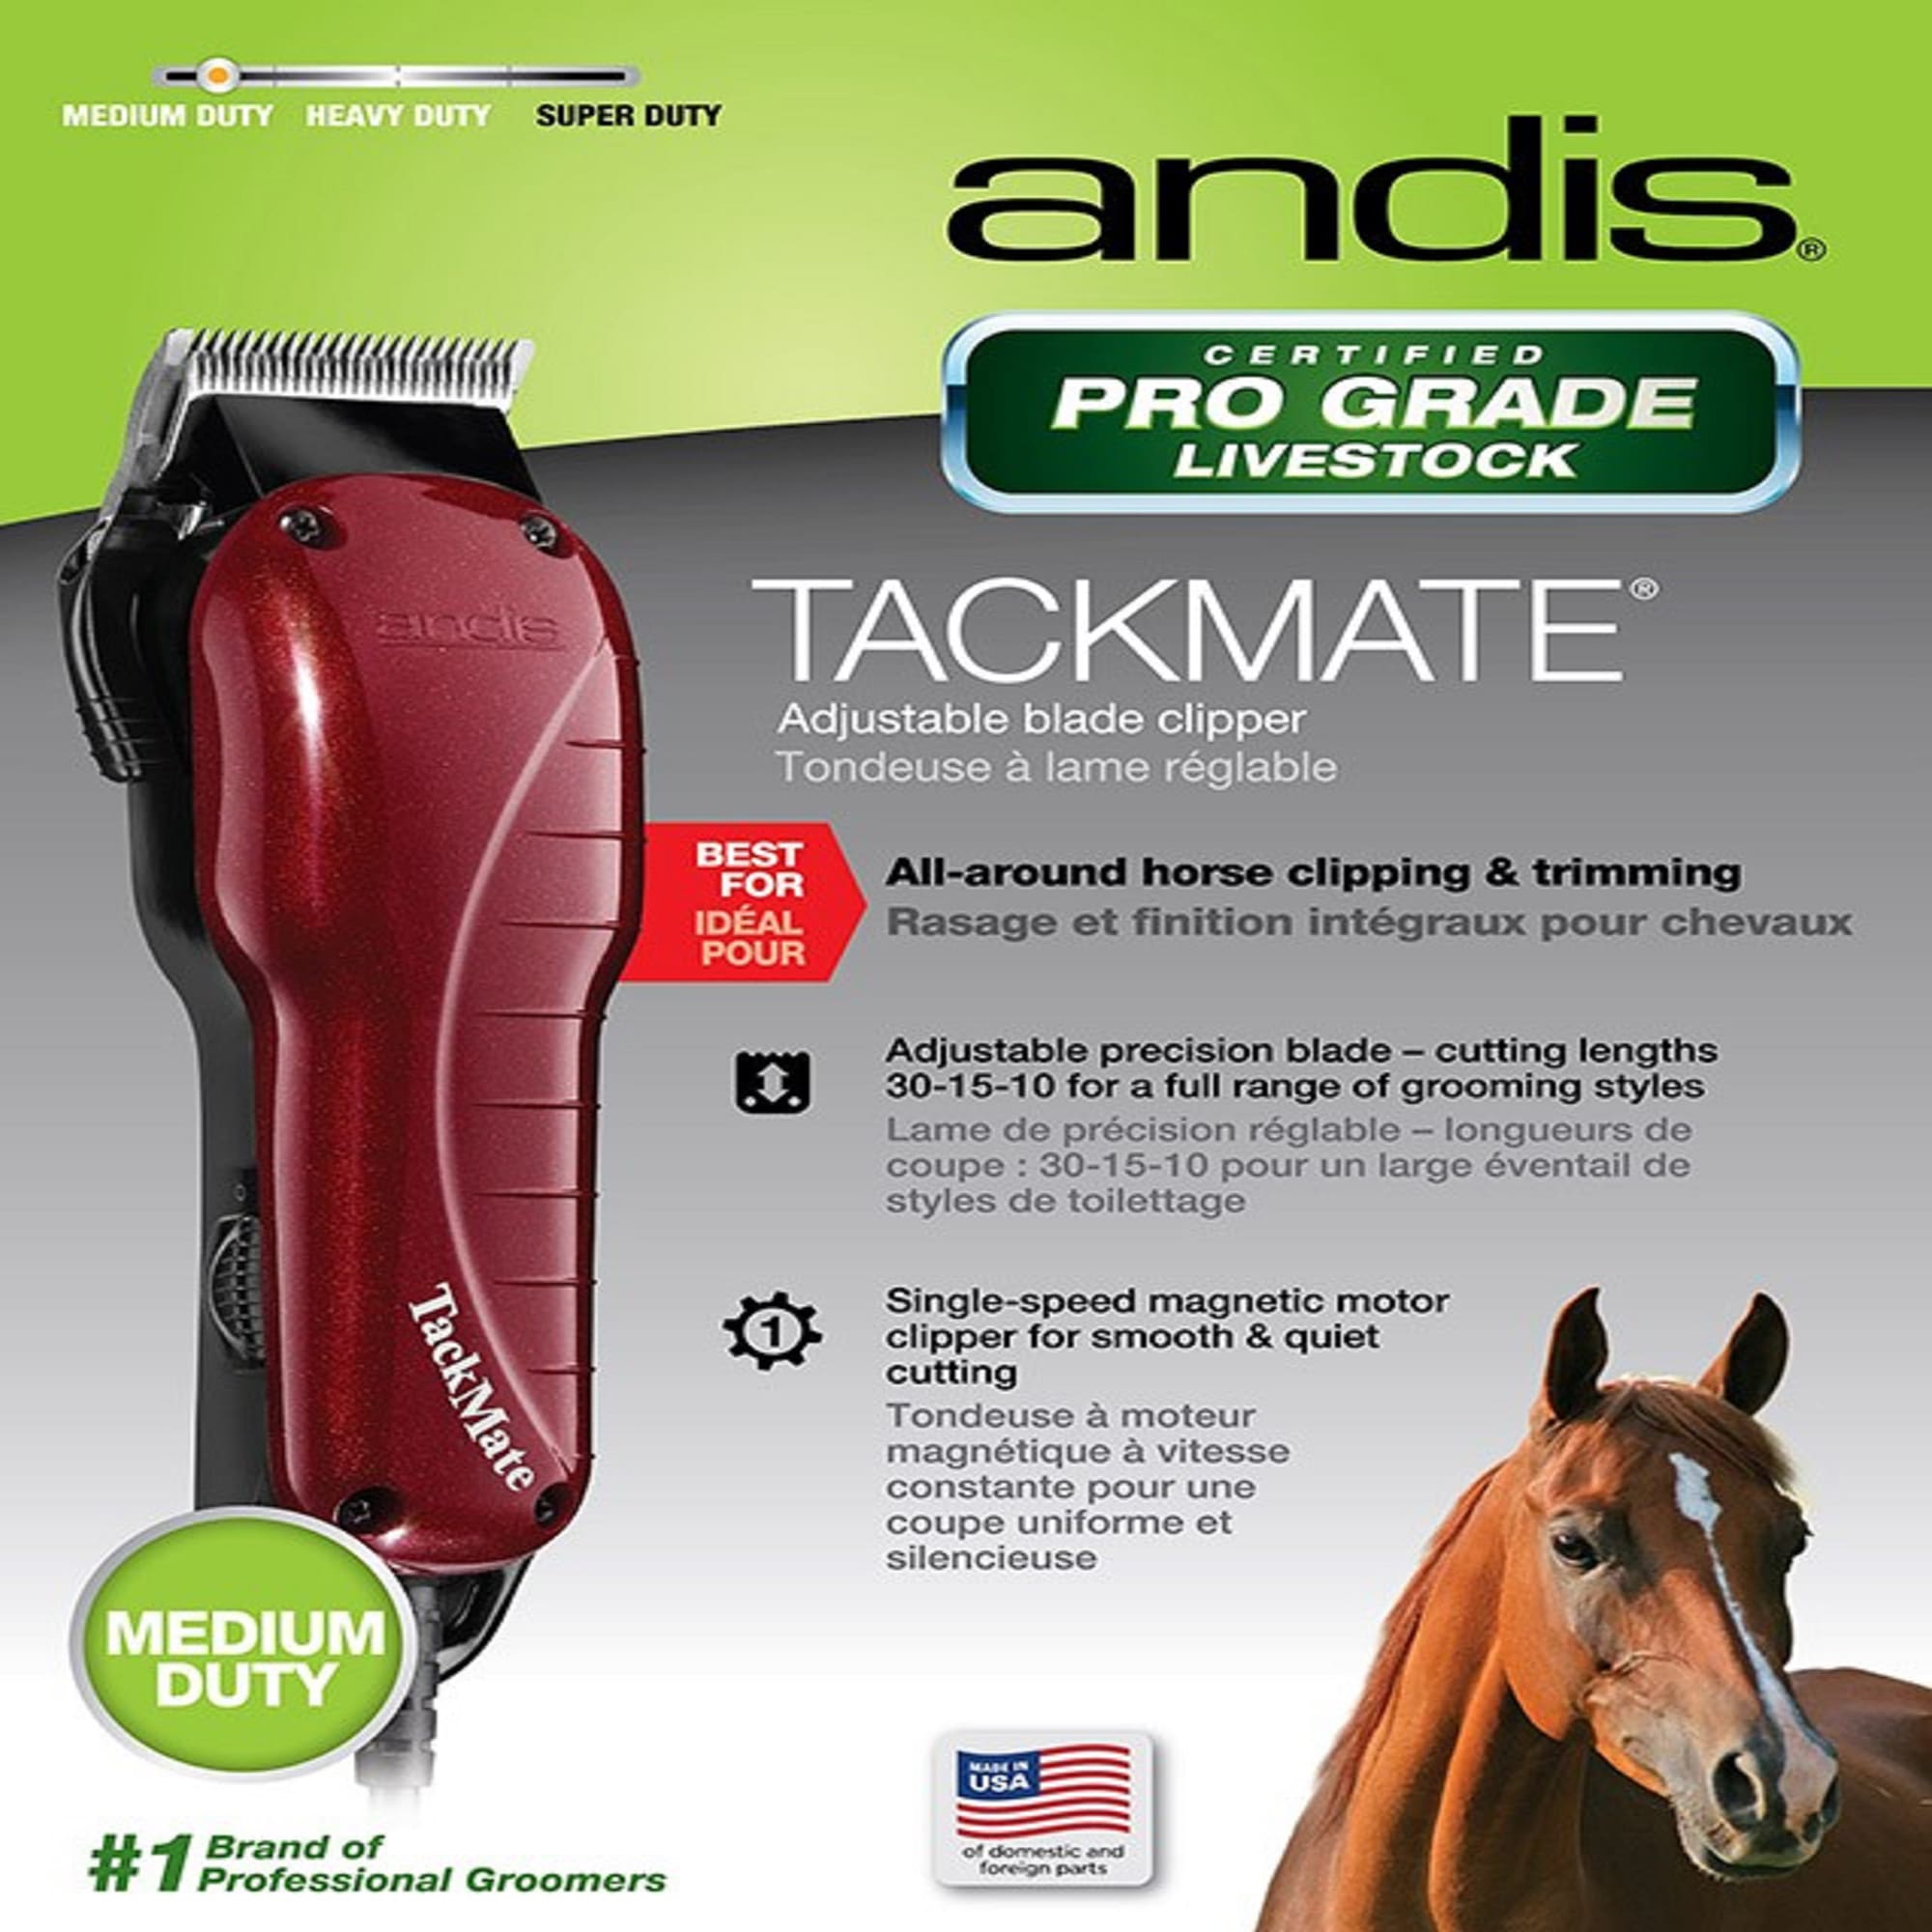 Andis Tackmate Adjustable Blade HighSpeed EQUINE CLIPPER SET HORSE Grooming Tack 